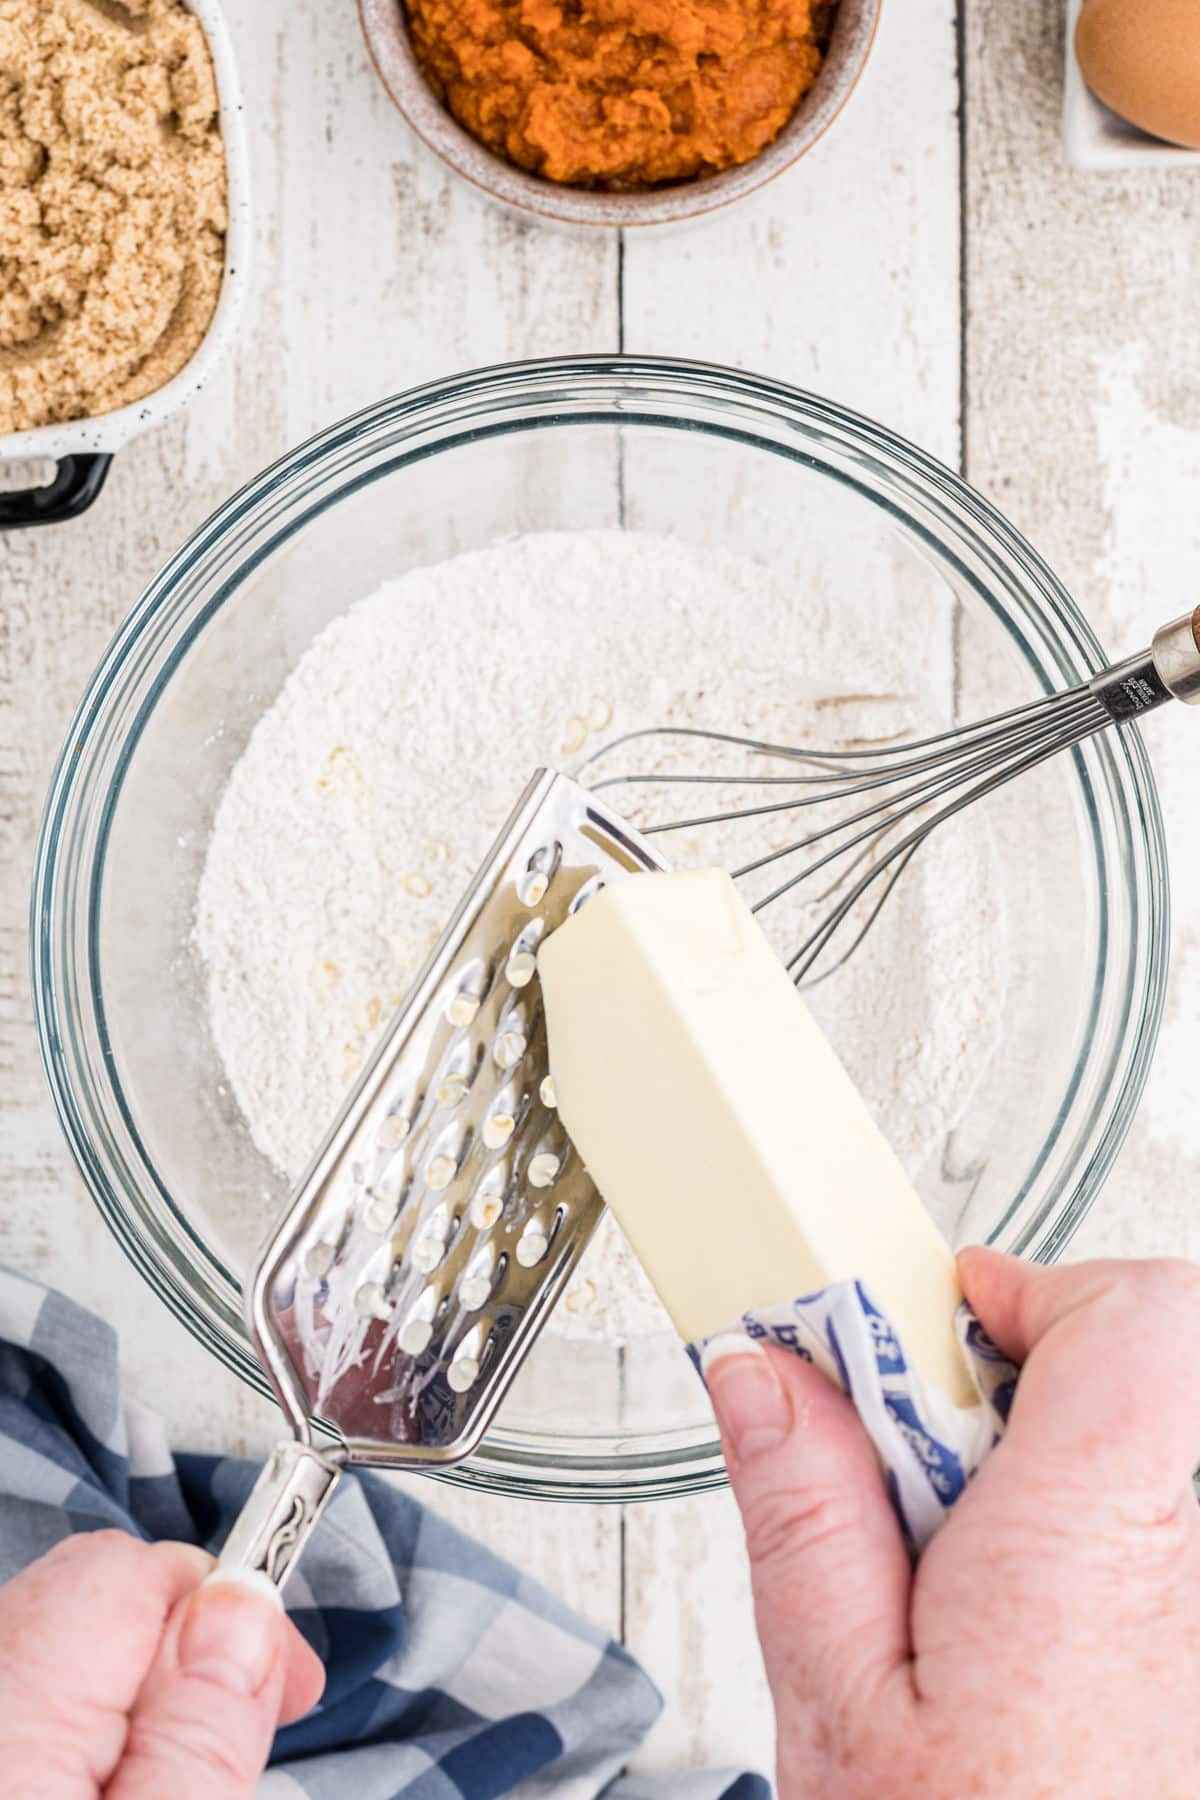 Butter being grated into a bowl of flour to make a pie crust.